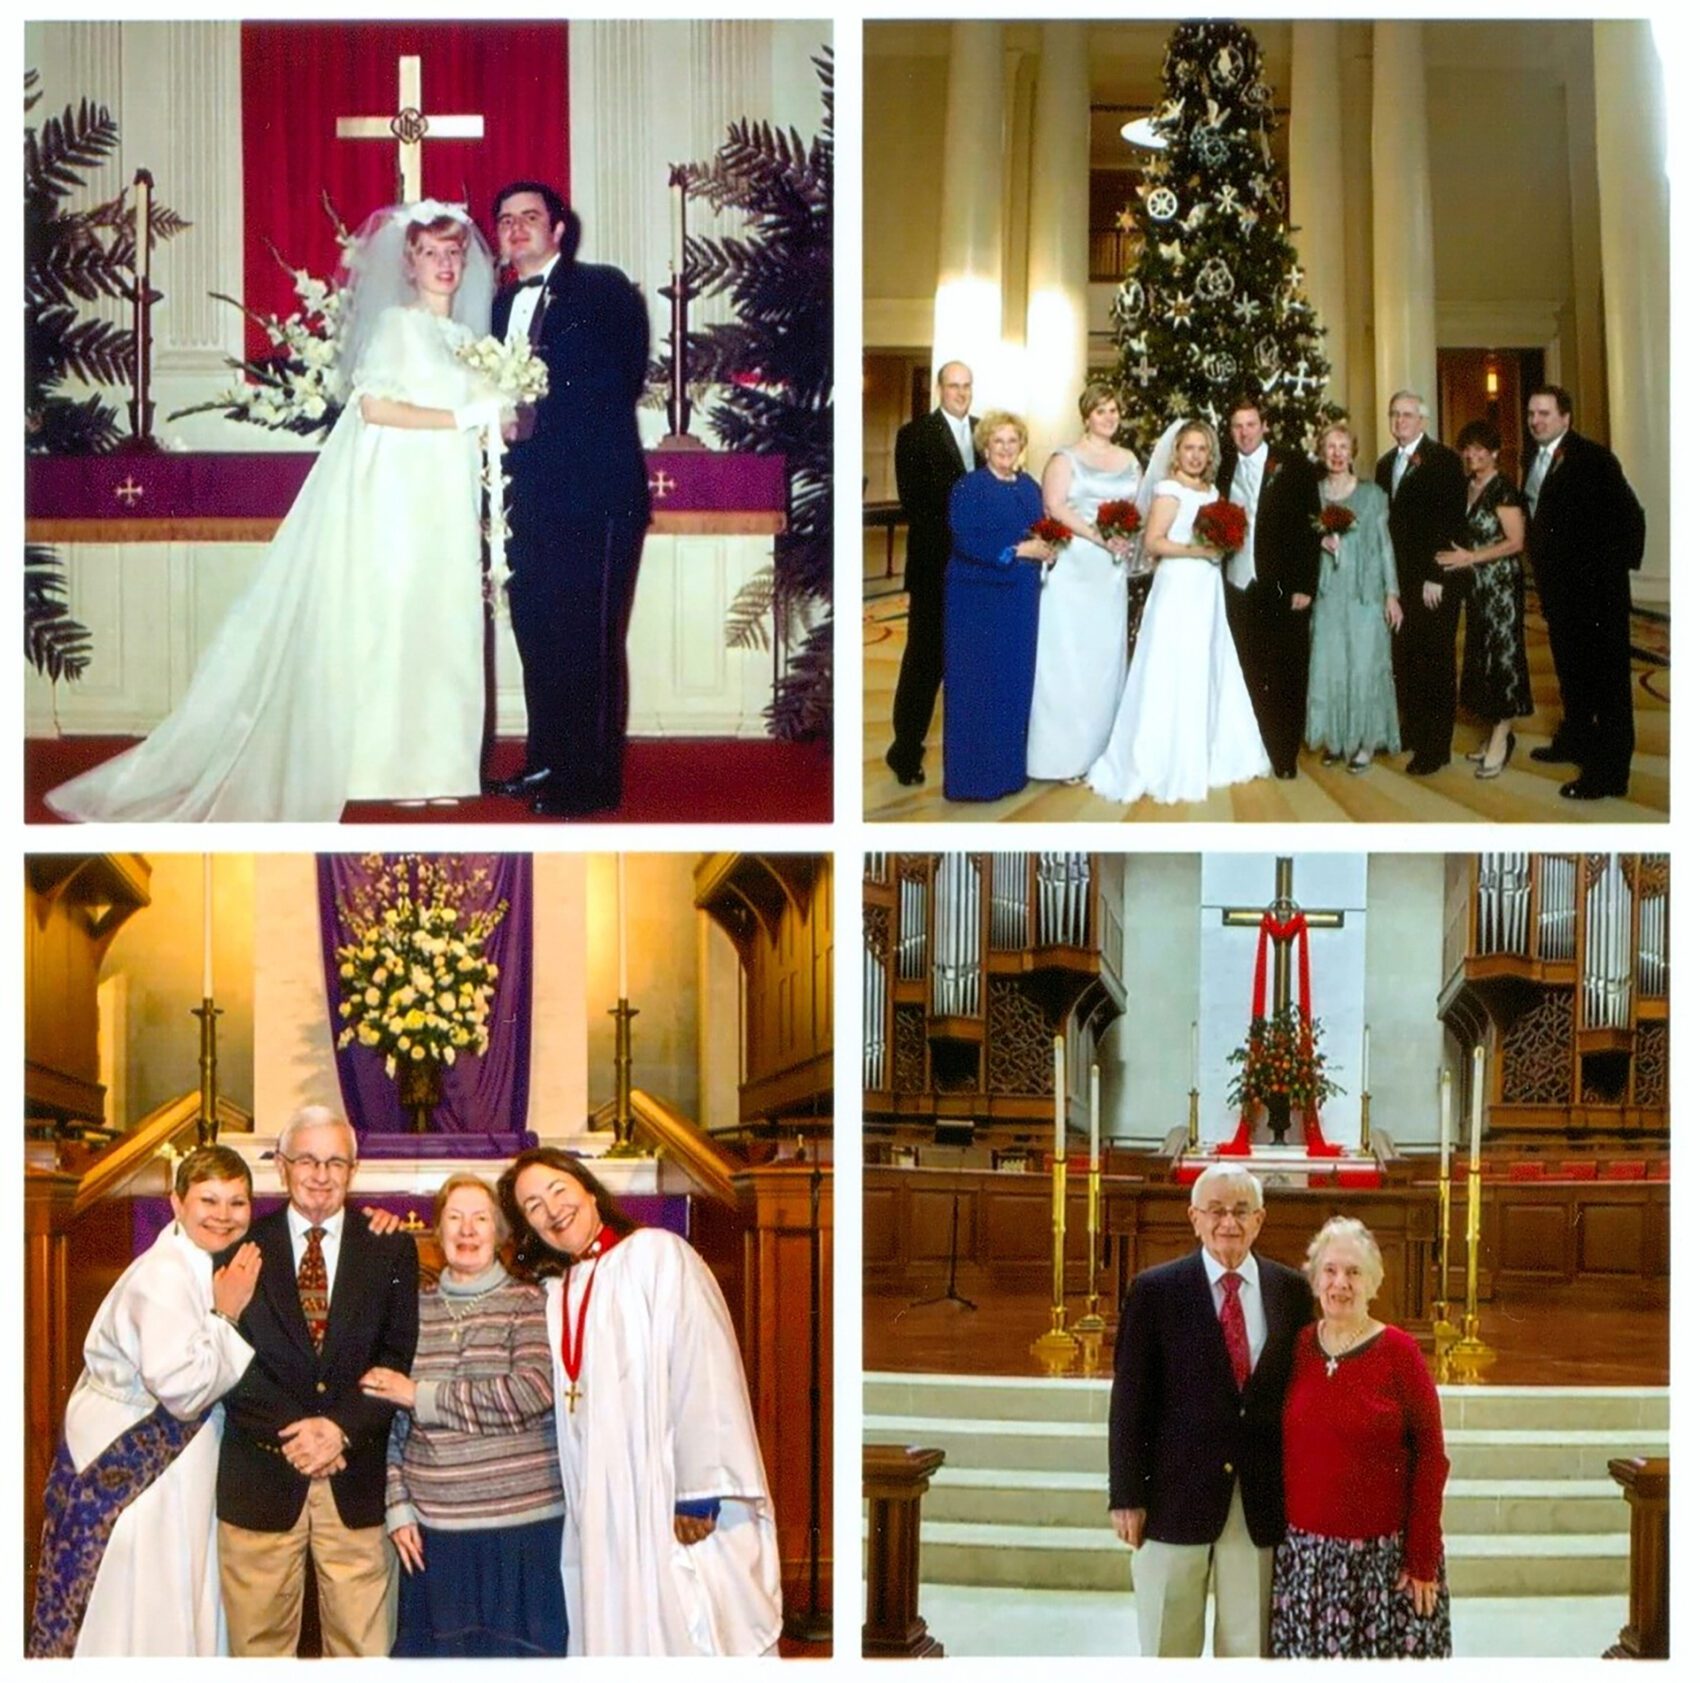 Fred and Carolyn Broce on their wedding day and years later at Peachtree Road UMC in Atlanta, GA.